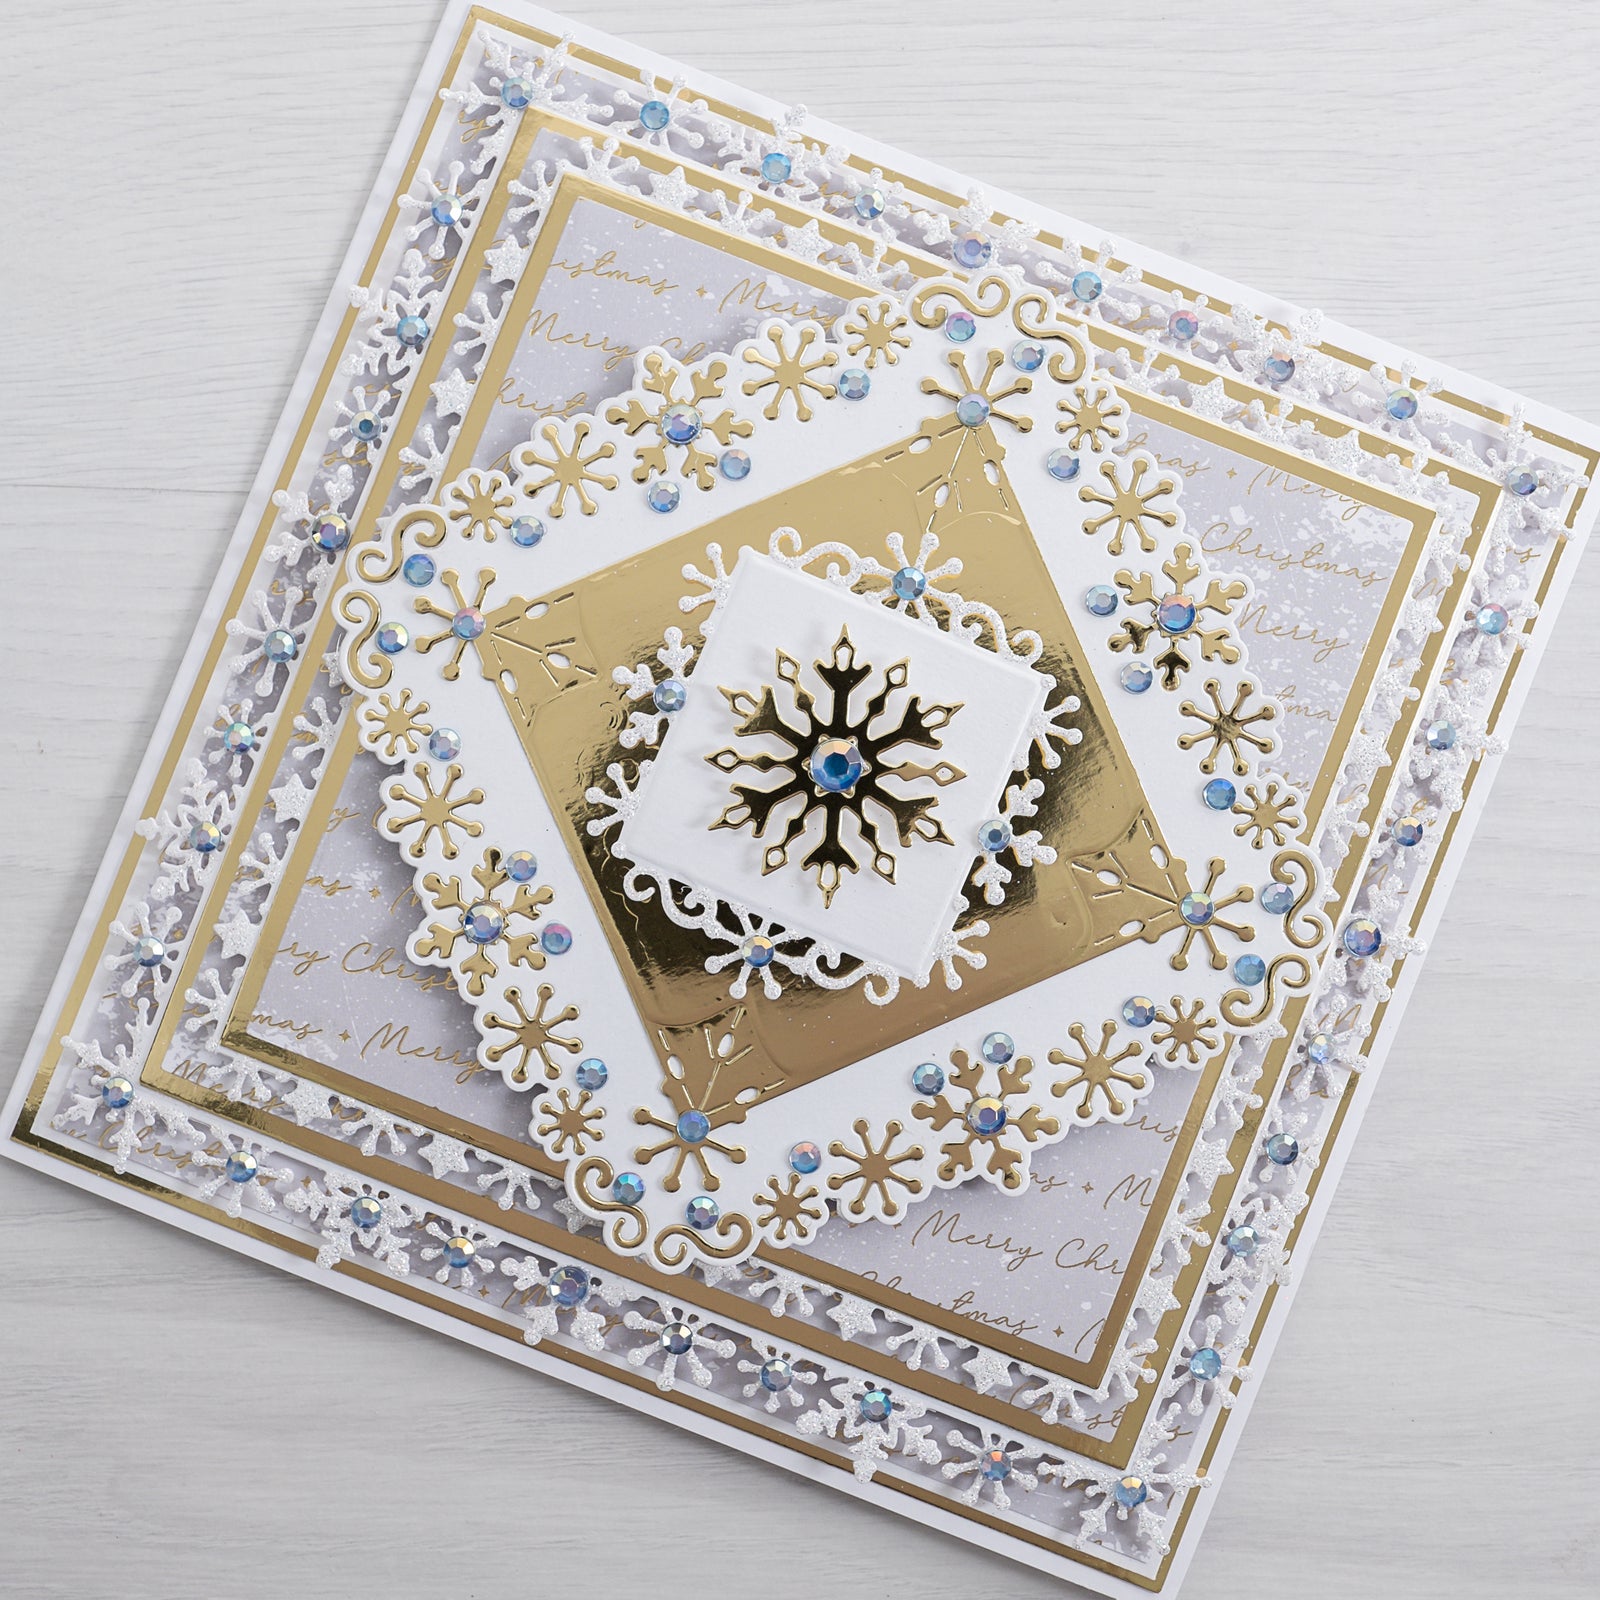 Learn how to create this stunning swirly snowflake Christmas card using the new Snowflake Frames Die Set and Swirly Snowflake Flurry Die and Stamp Set from Chloes Creative Cards.